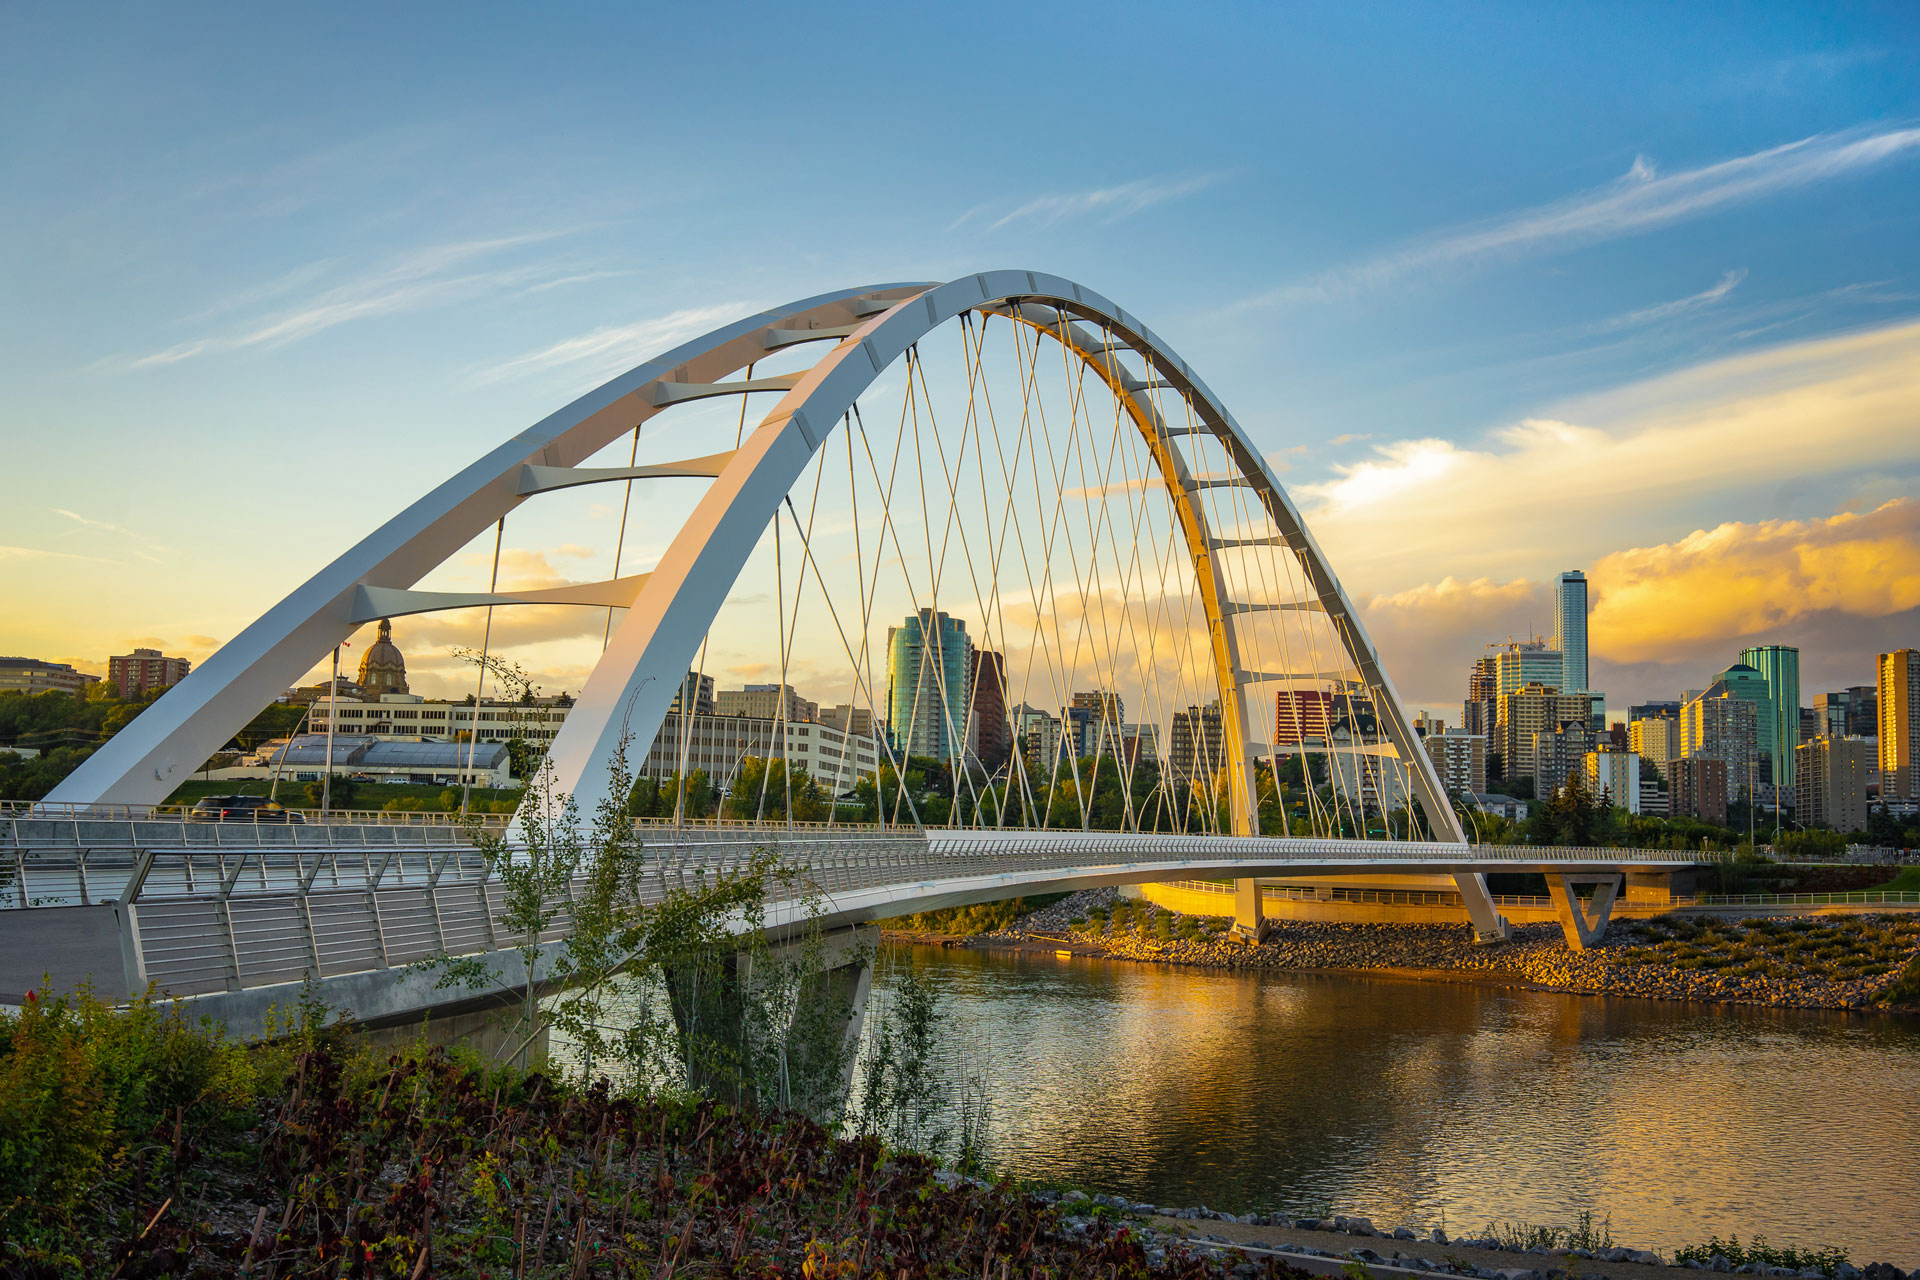 The Best Things to do in Edmonton, Alberta